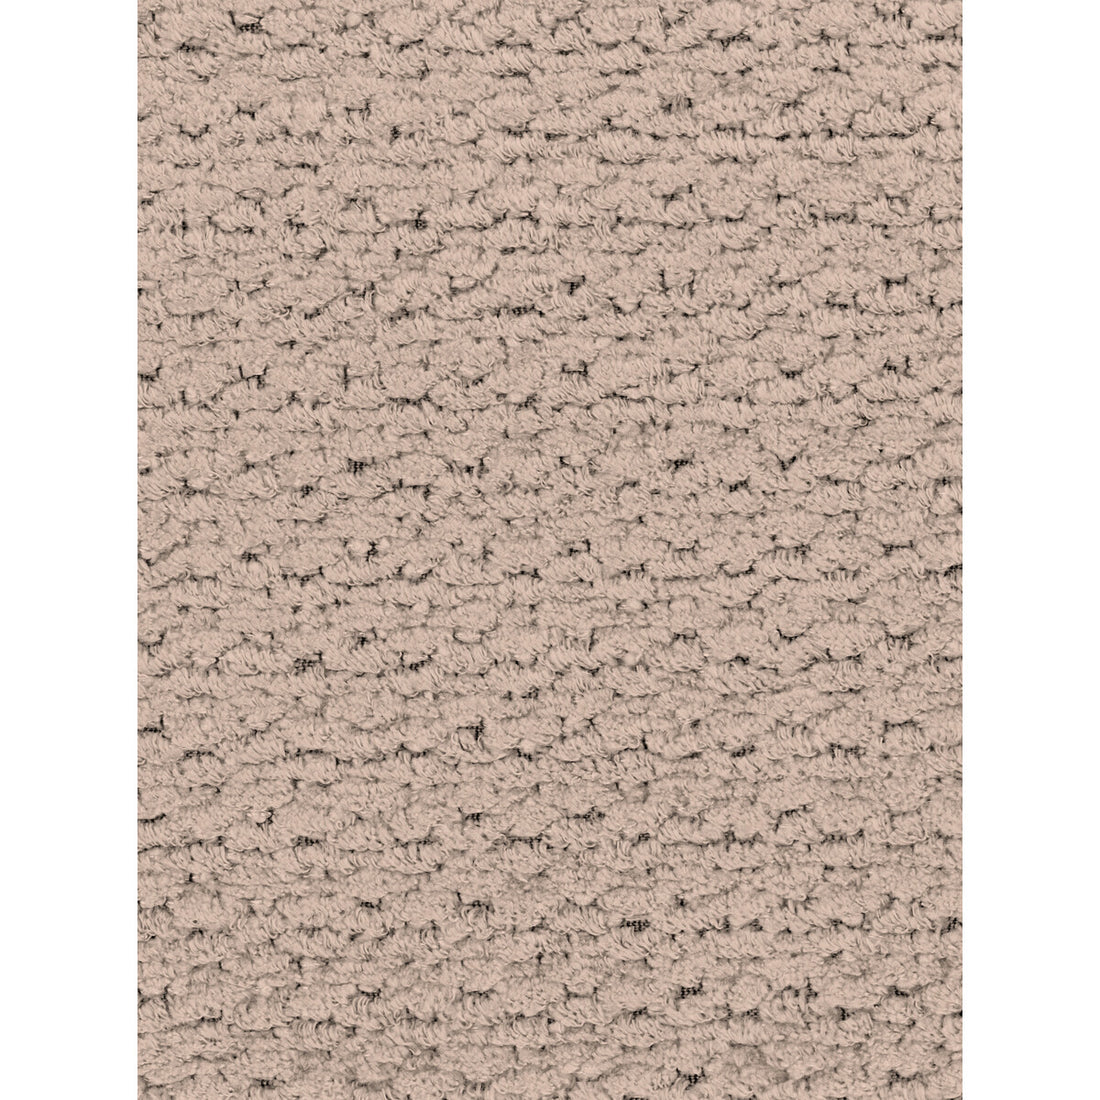 Dionysian Vel fabric in taupe color - pattern GWF-3702.6.0 - by Lee Jofa Modern in the Prism collection